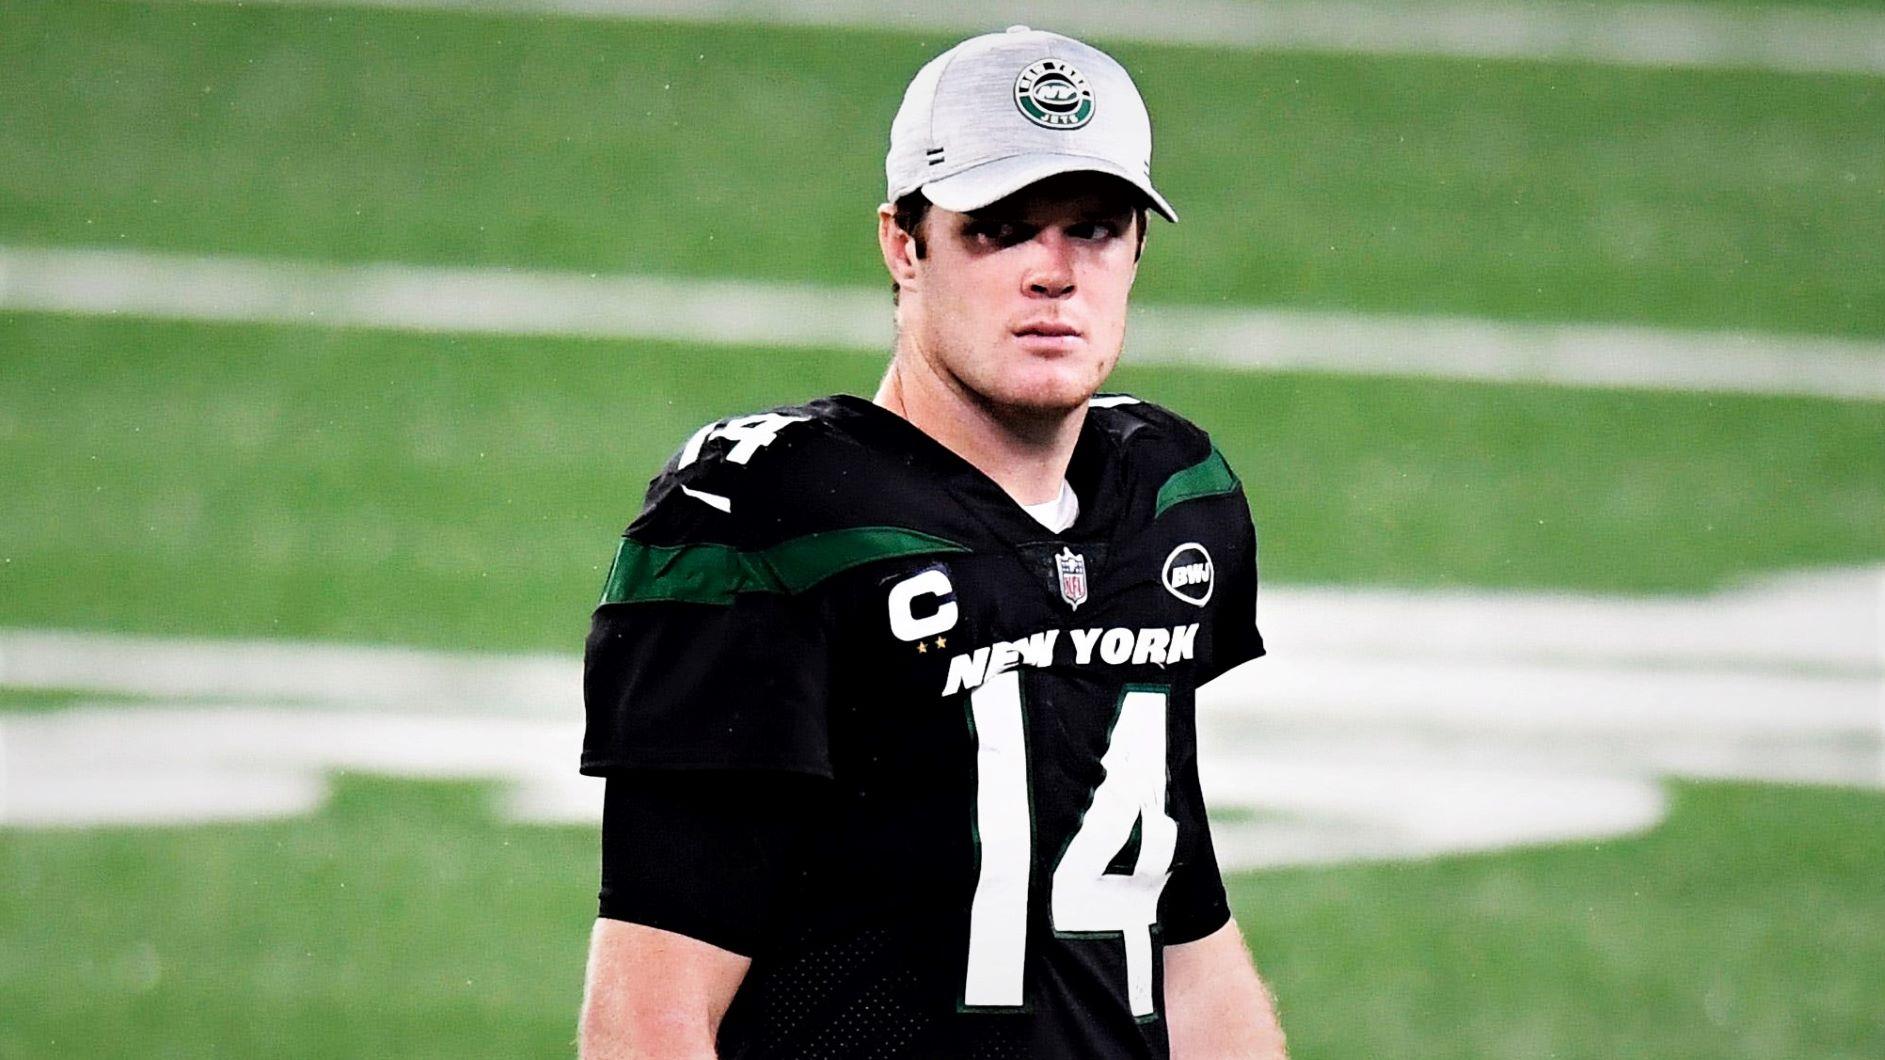 Sam Darnold wearing hat and black jersey after loss to Broncos / USA TODAY